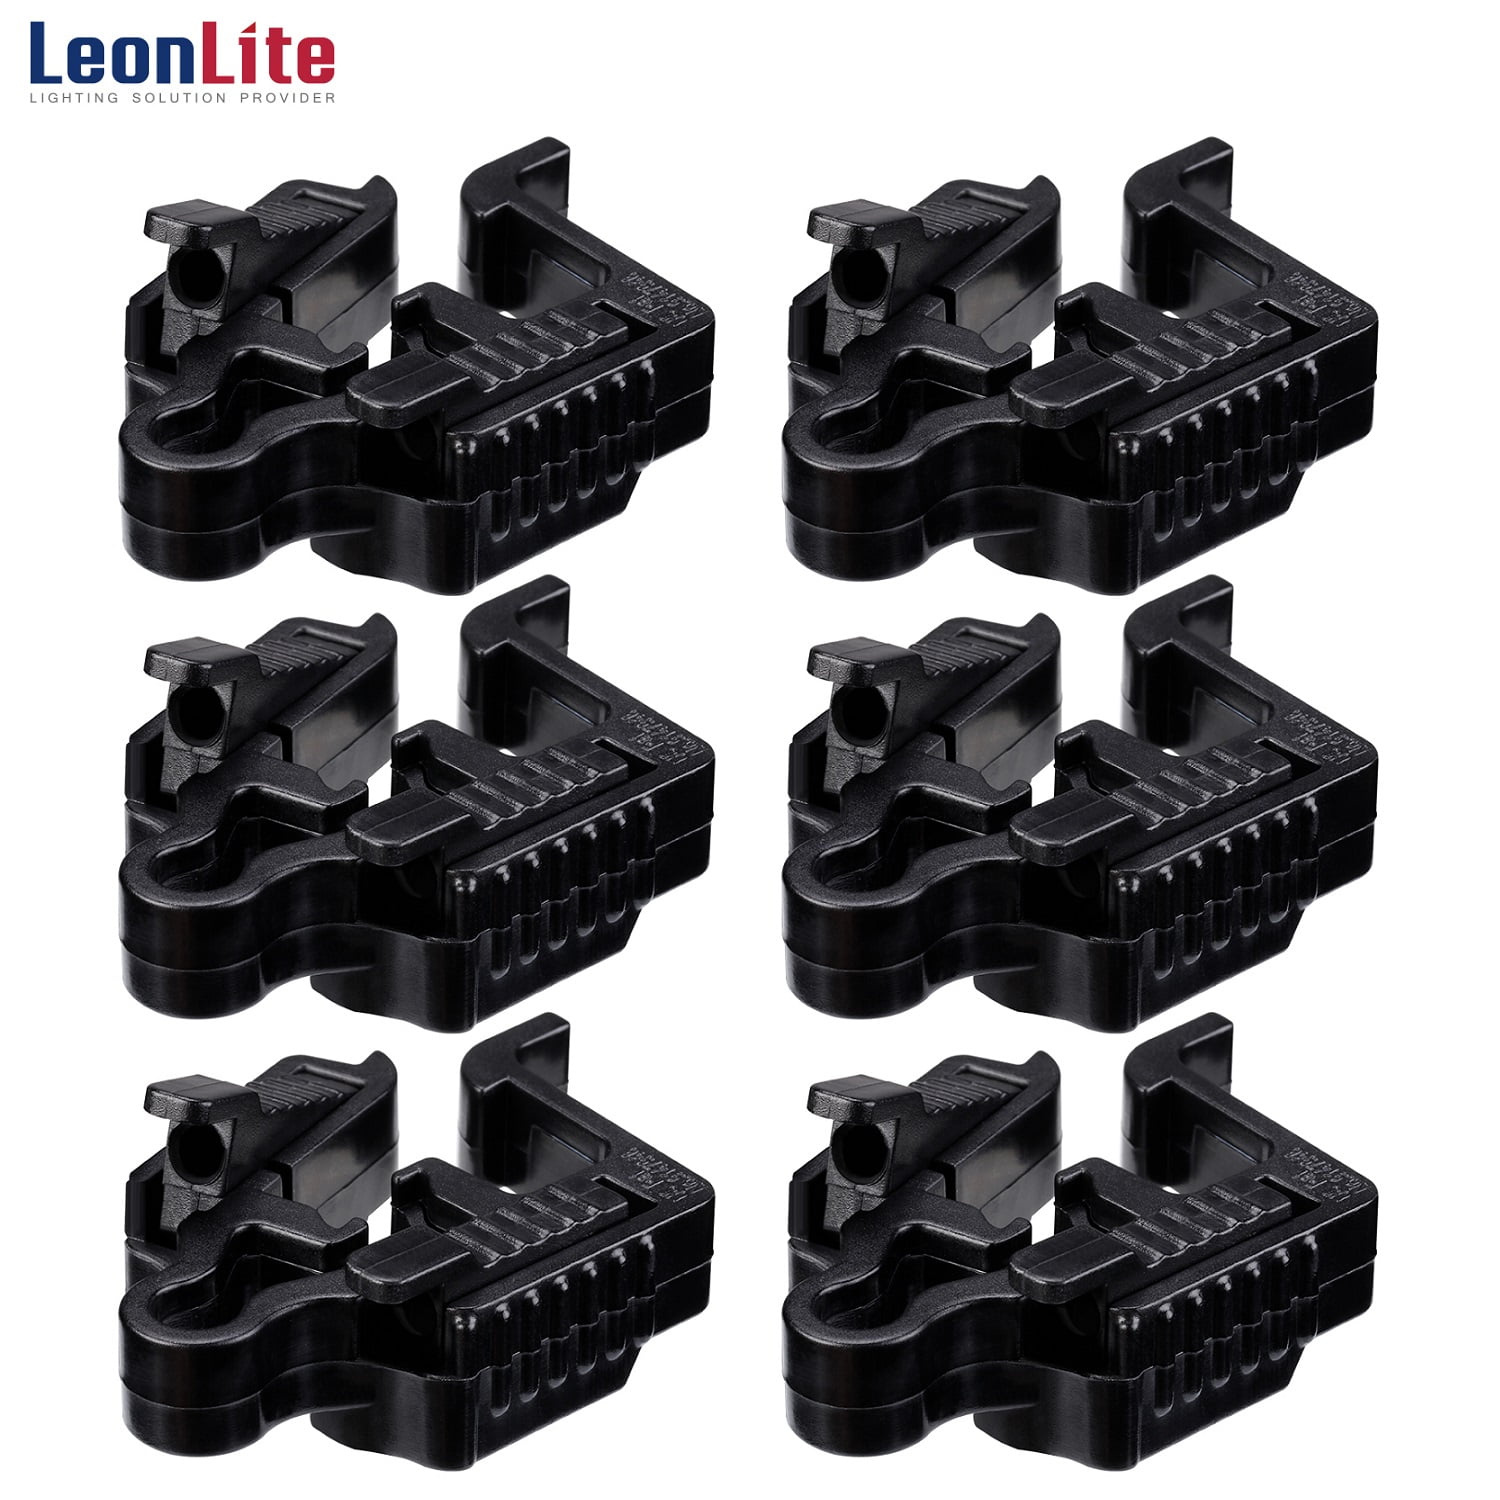 Ul Listed Cable Connectors, Landscape Lighting Wire Connectors